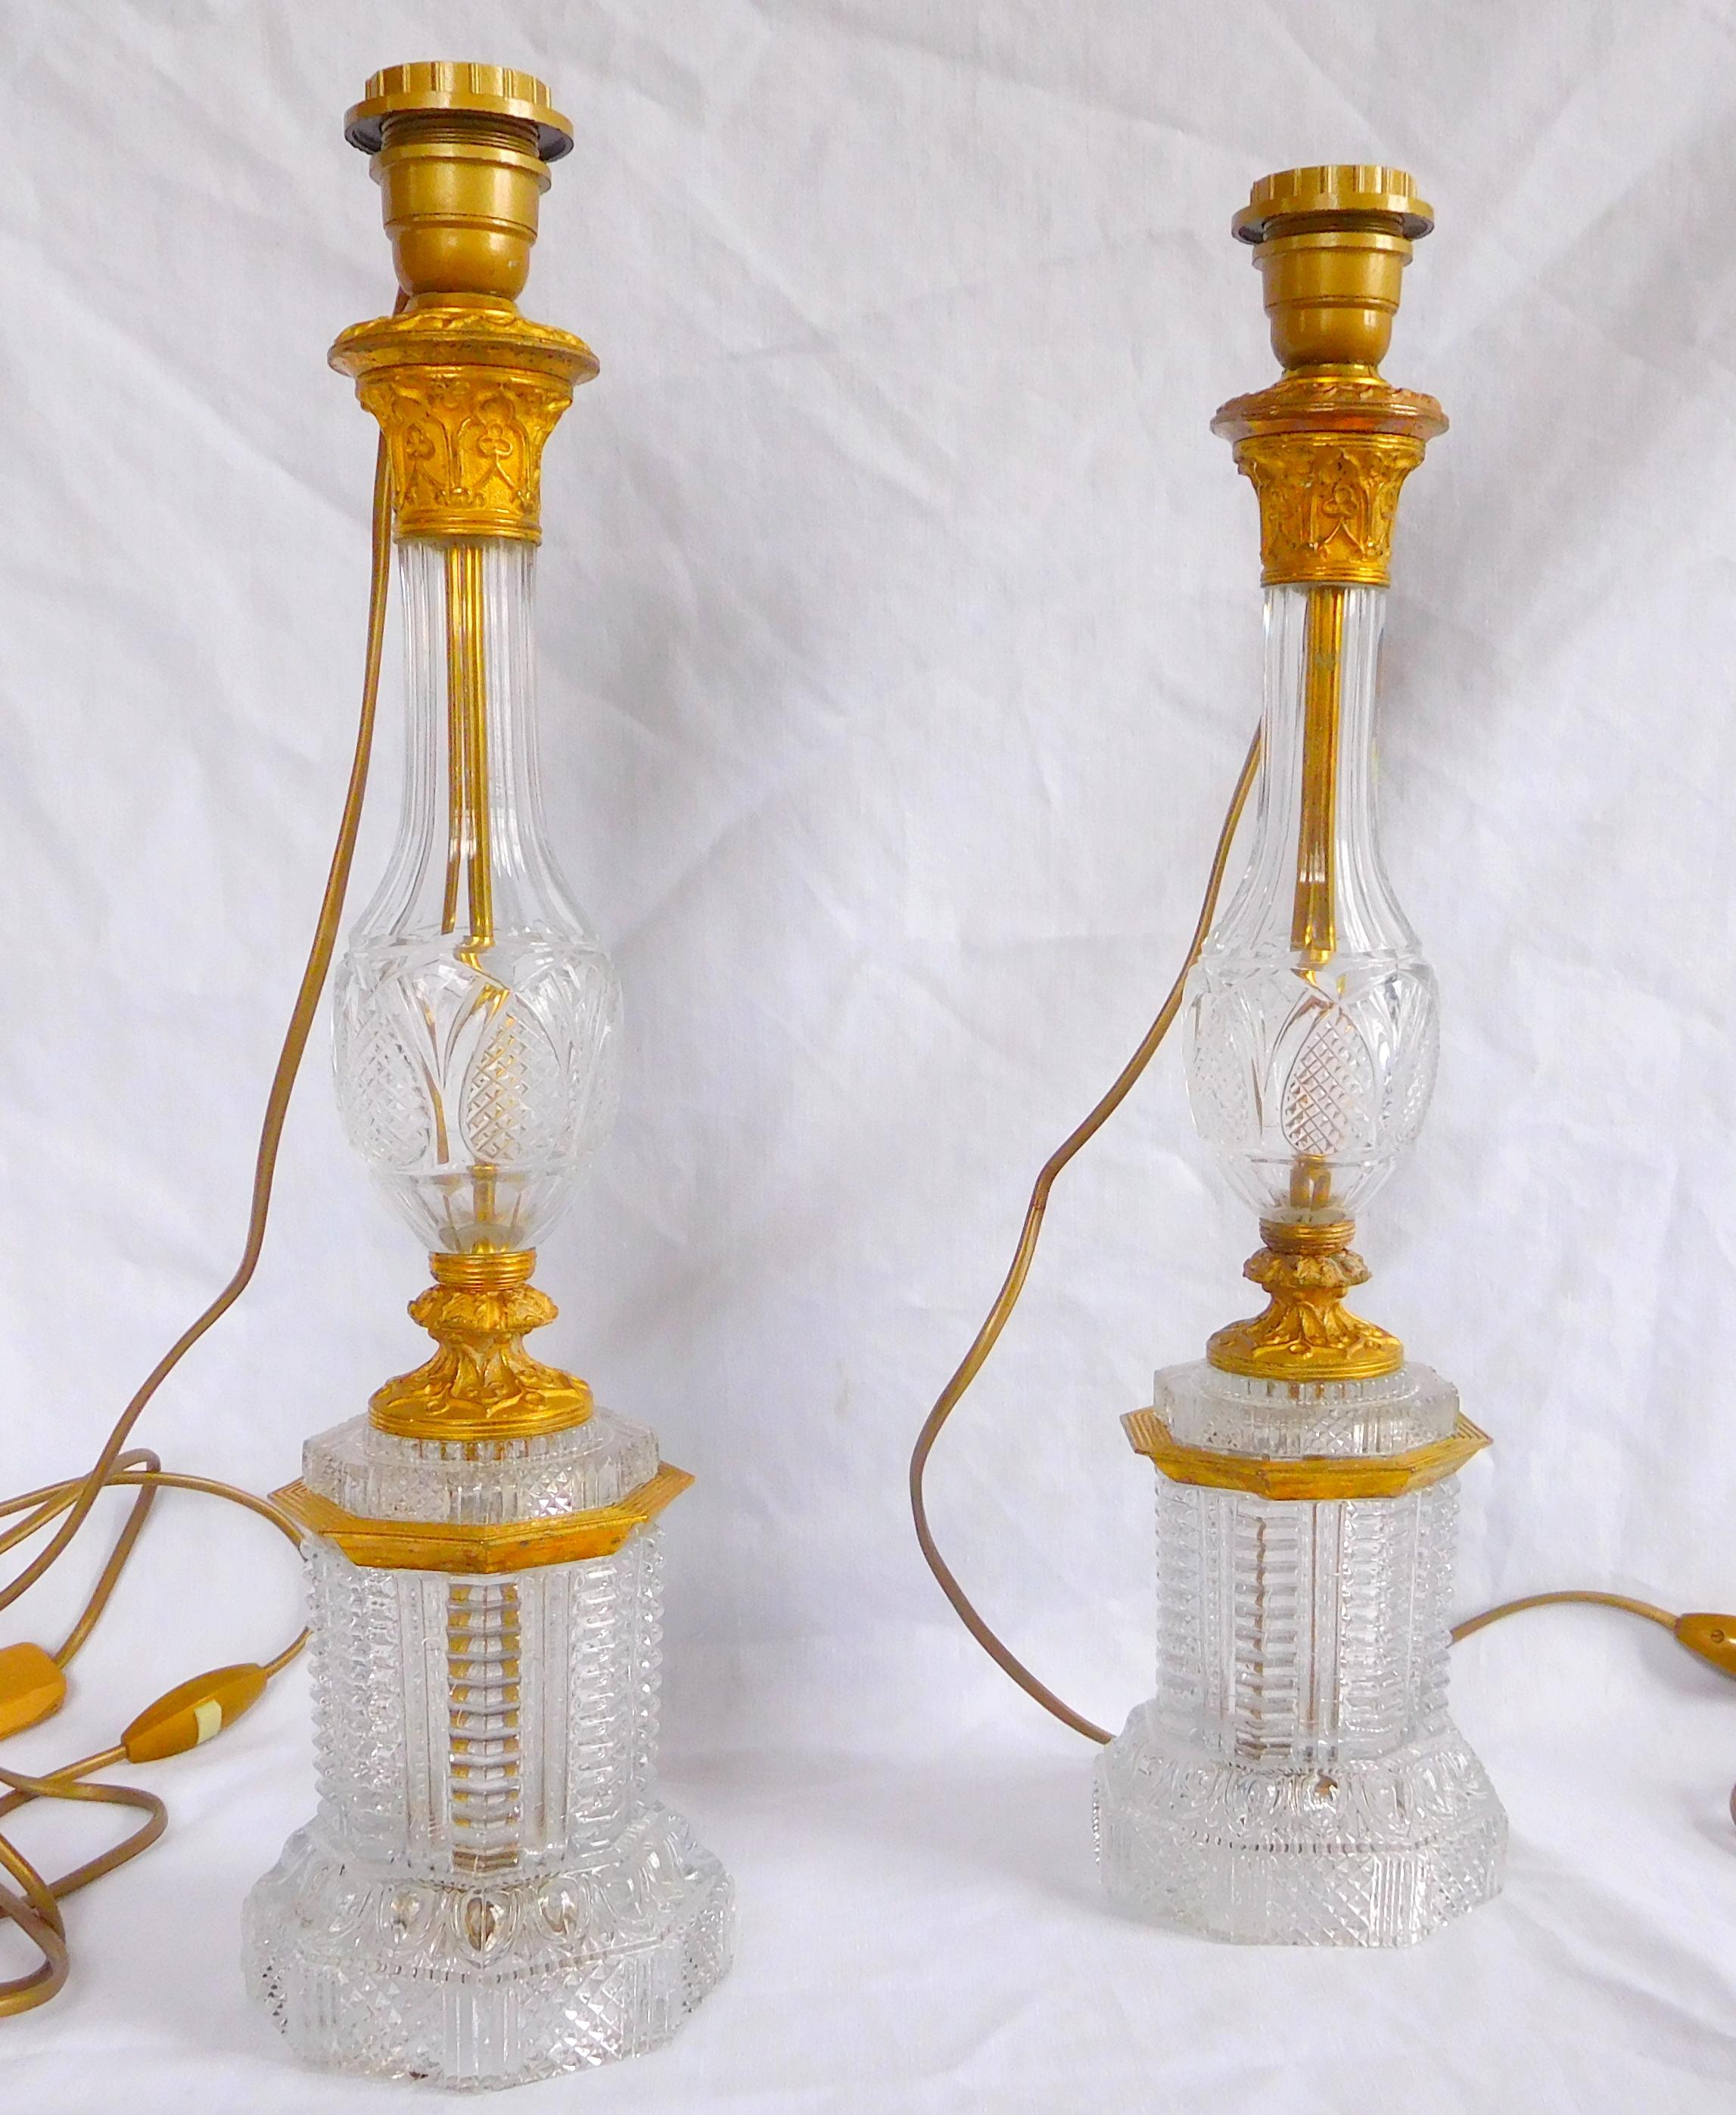 Pair of tall crystal and ormolu (gilt bronze) lamps. Beautiful, finely cut diamond-shaped pattern. Attributed to Le Creusot Manufacture, Royal crystal manufacture in early 19th century.

Empire / Restauration period, early 19th century production